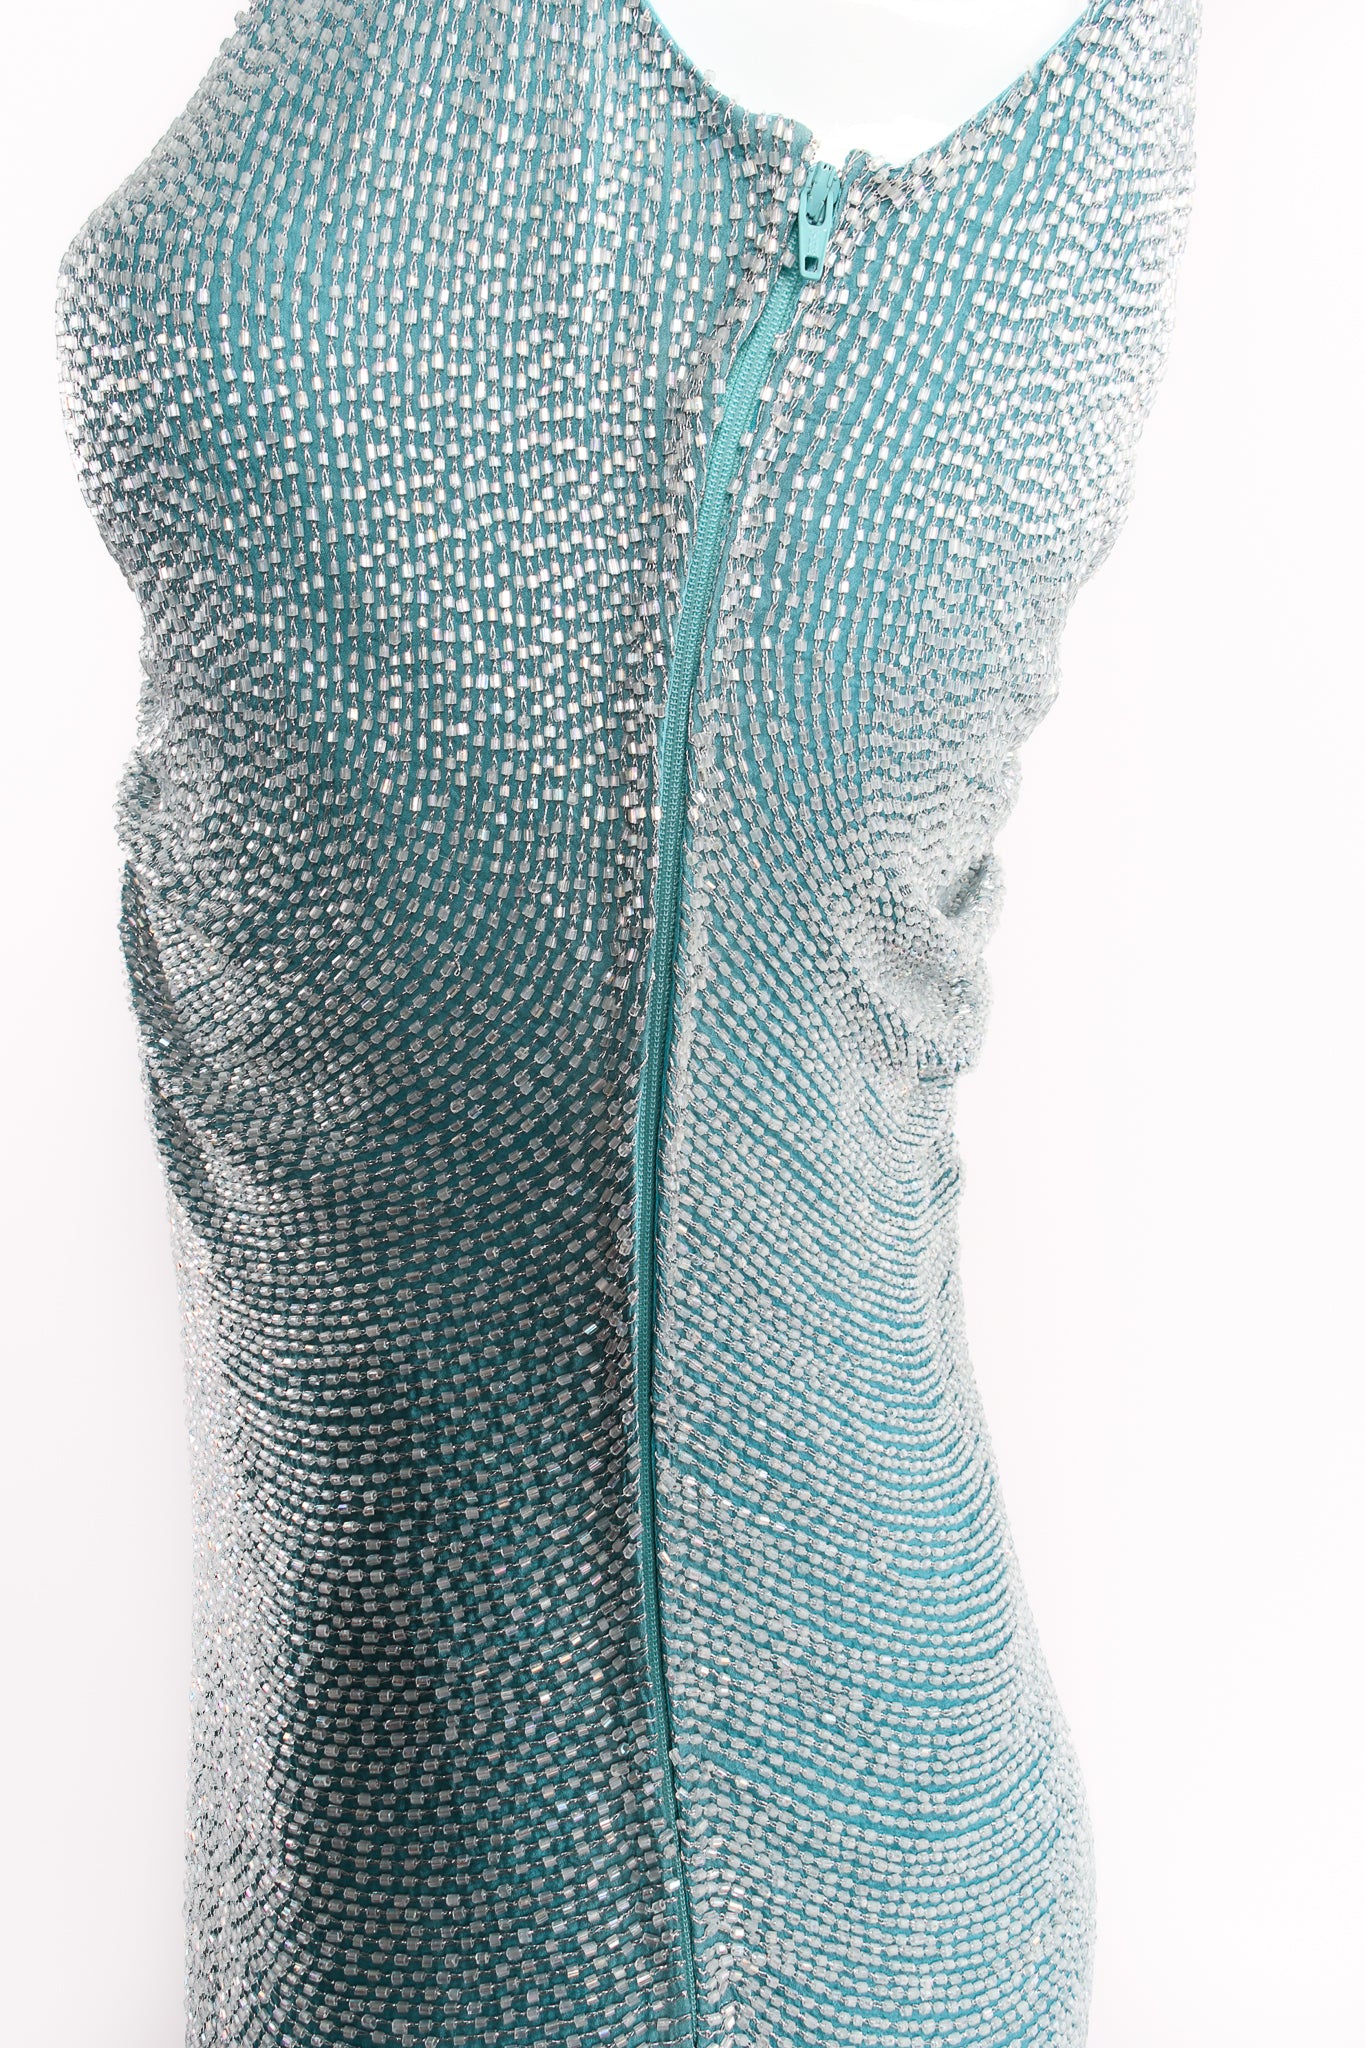 Vintage Badgley Mischka Beaded Ruched Bodice Dress on Mannequin side zip at Recess Los Angeles